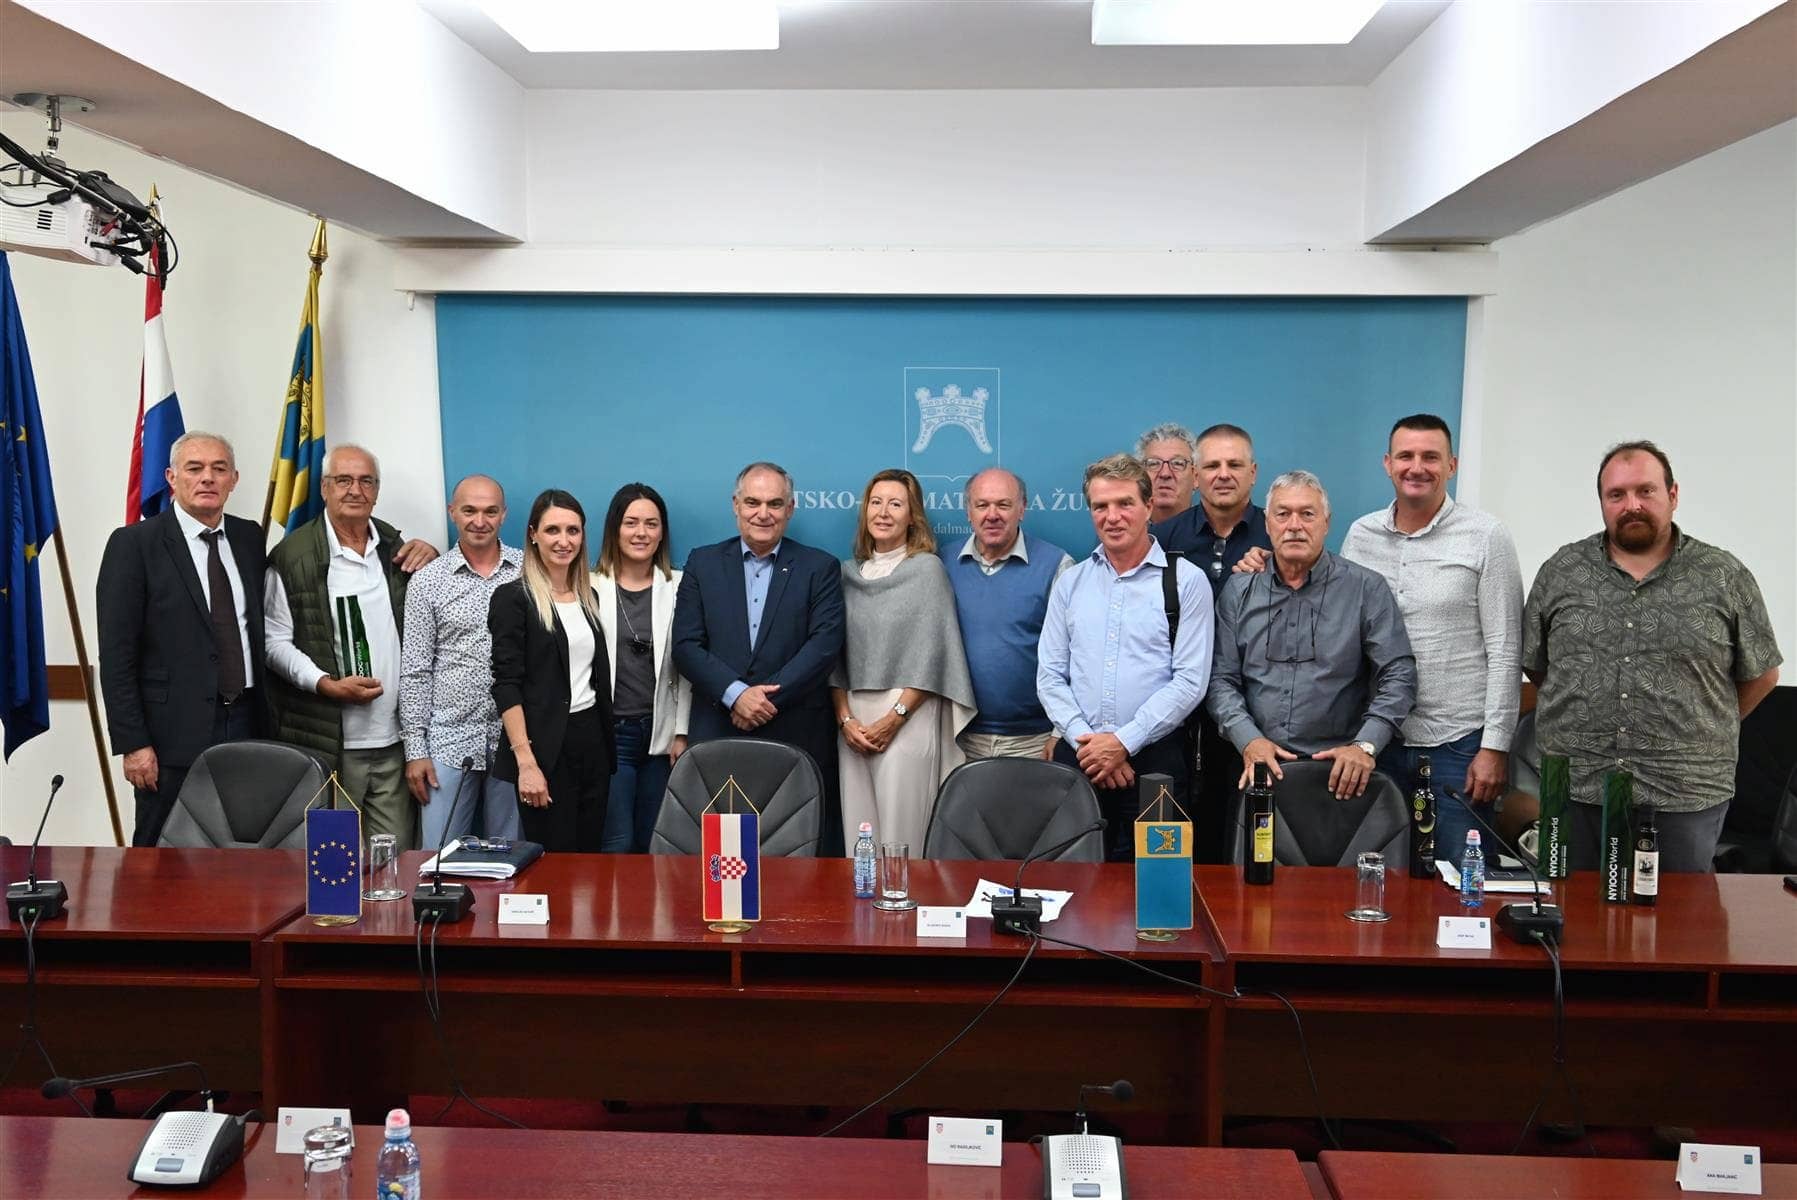 business-europe-production-the-best-olive-oils-officials-congratulate-regional-nyiooc-winners-at-ceremony-in-split-olive-oil-times